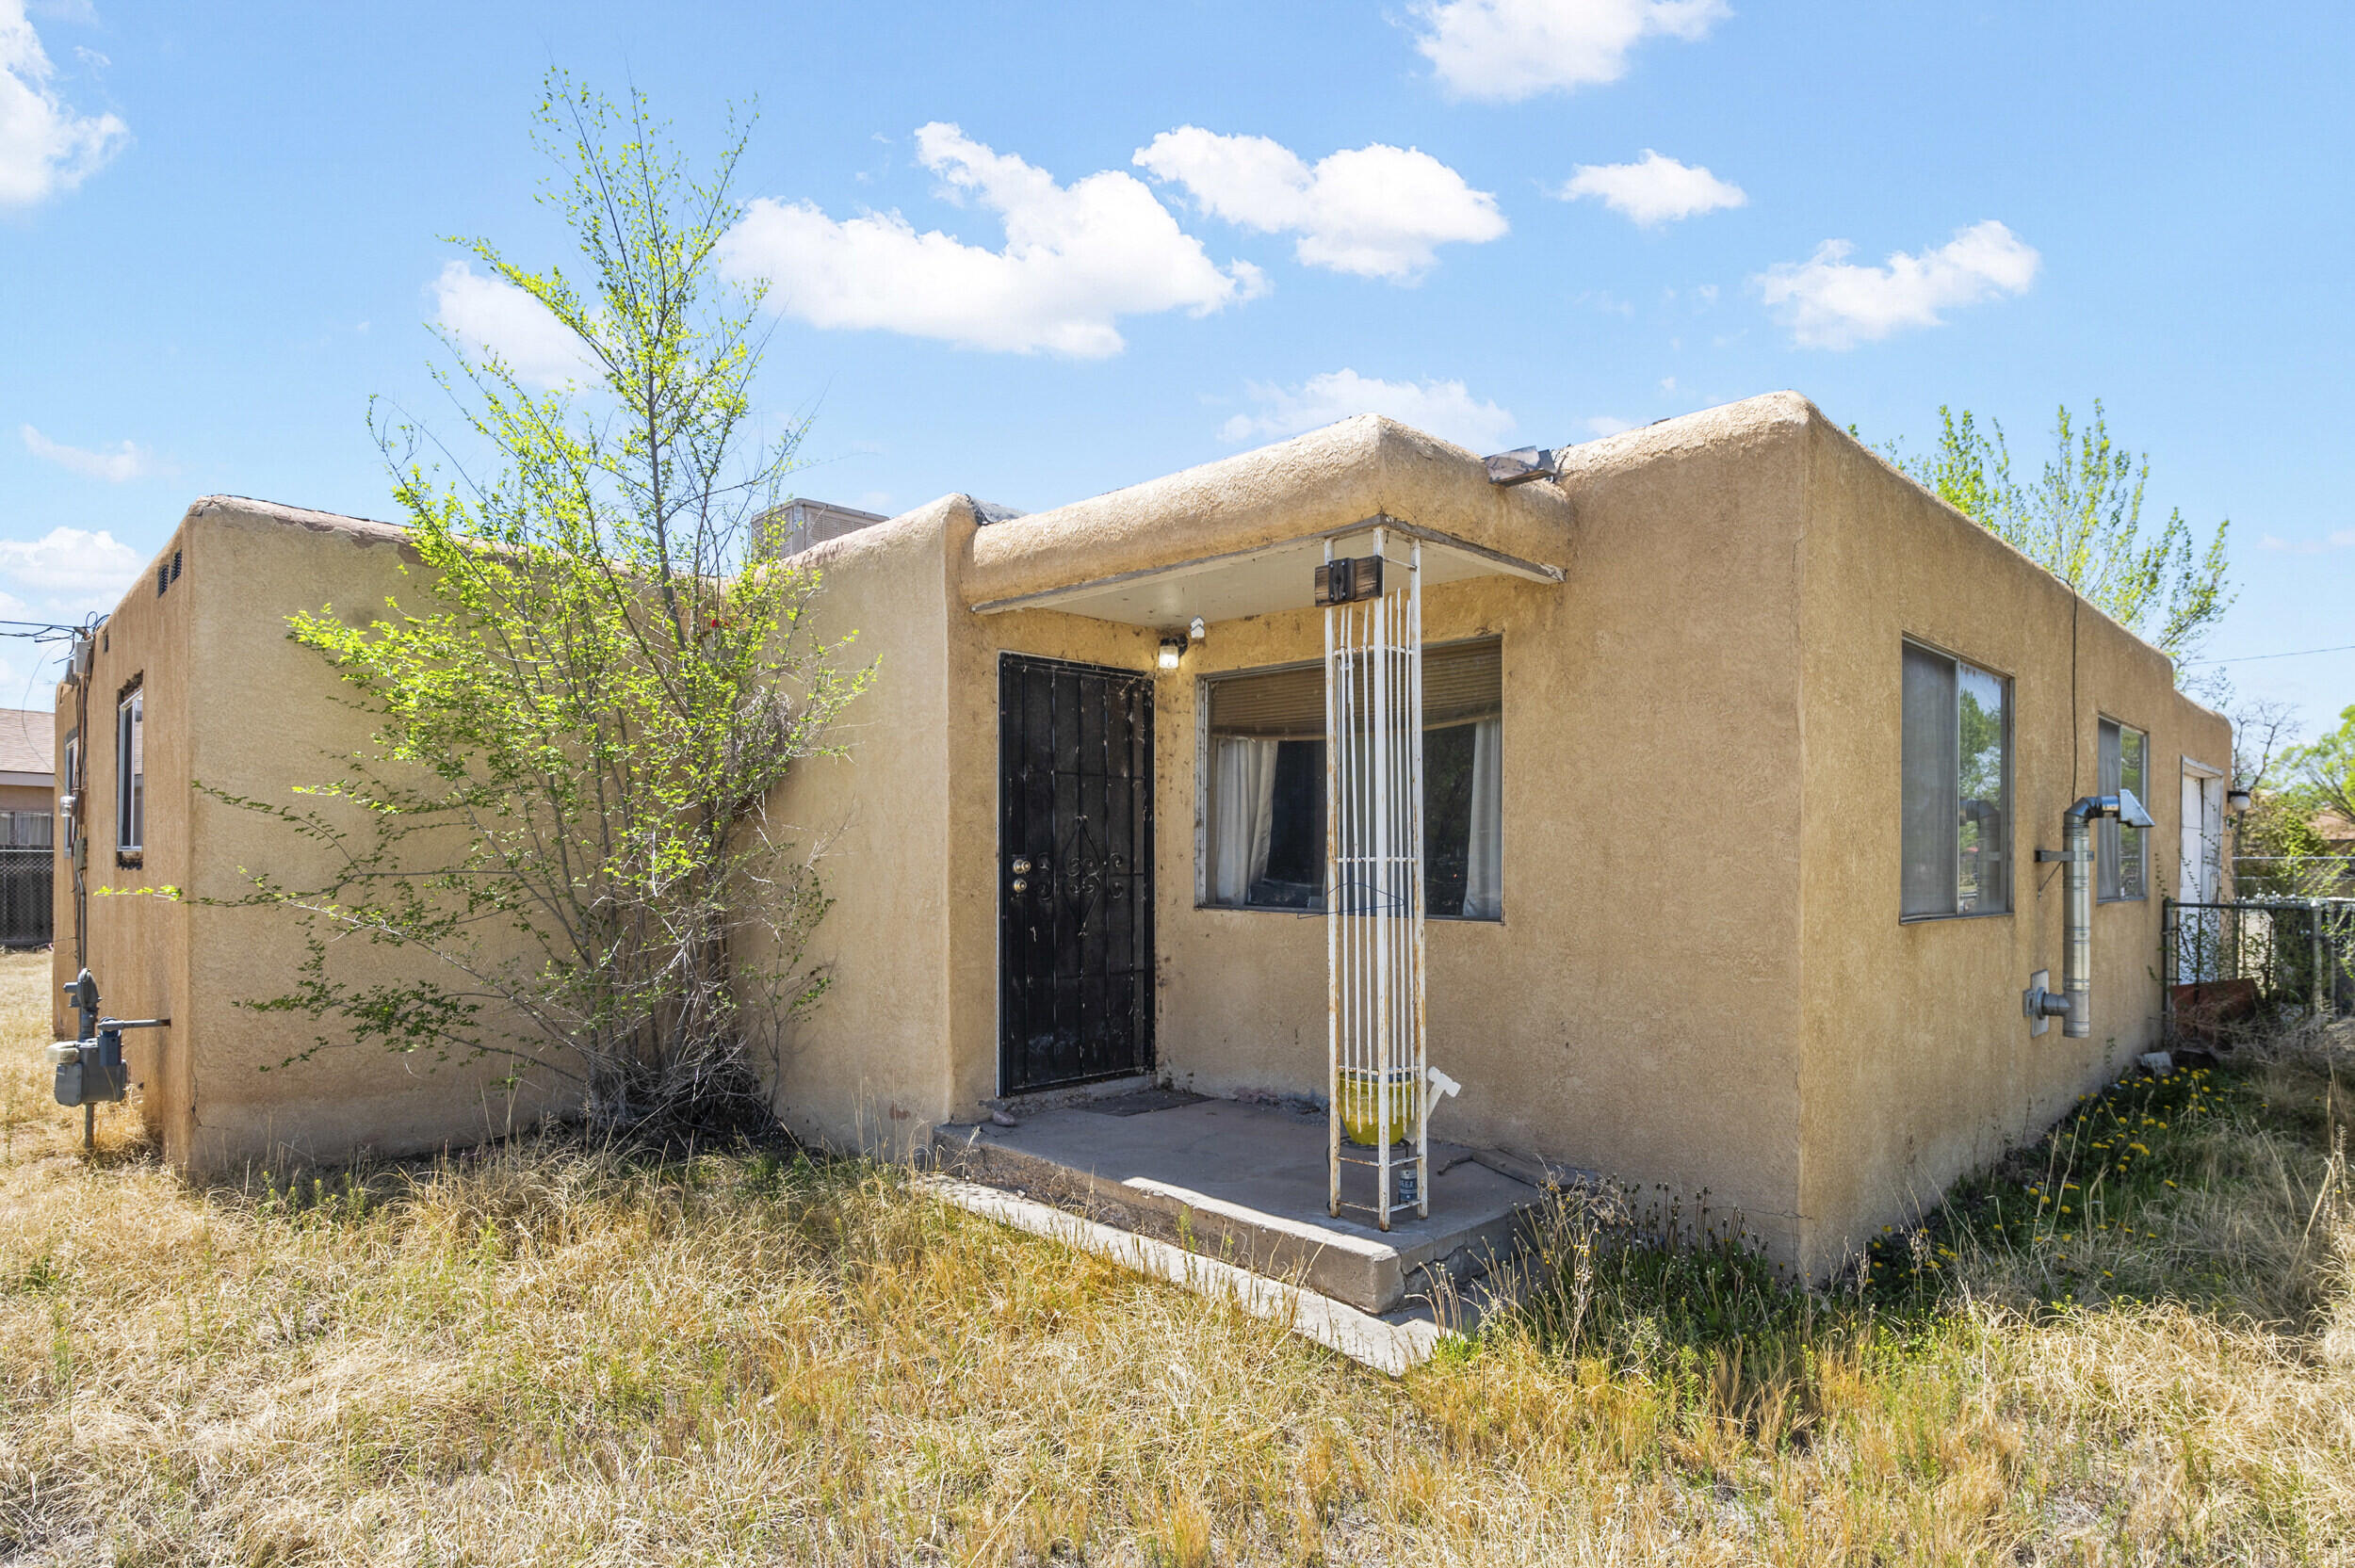 Welome to a wonderful property located in the South Valley. This 3 bedroom, 2 bathroom home offers a half acre of land, private well, and freestanding garage workshop with electricity. With a little work this property will offer a great return.